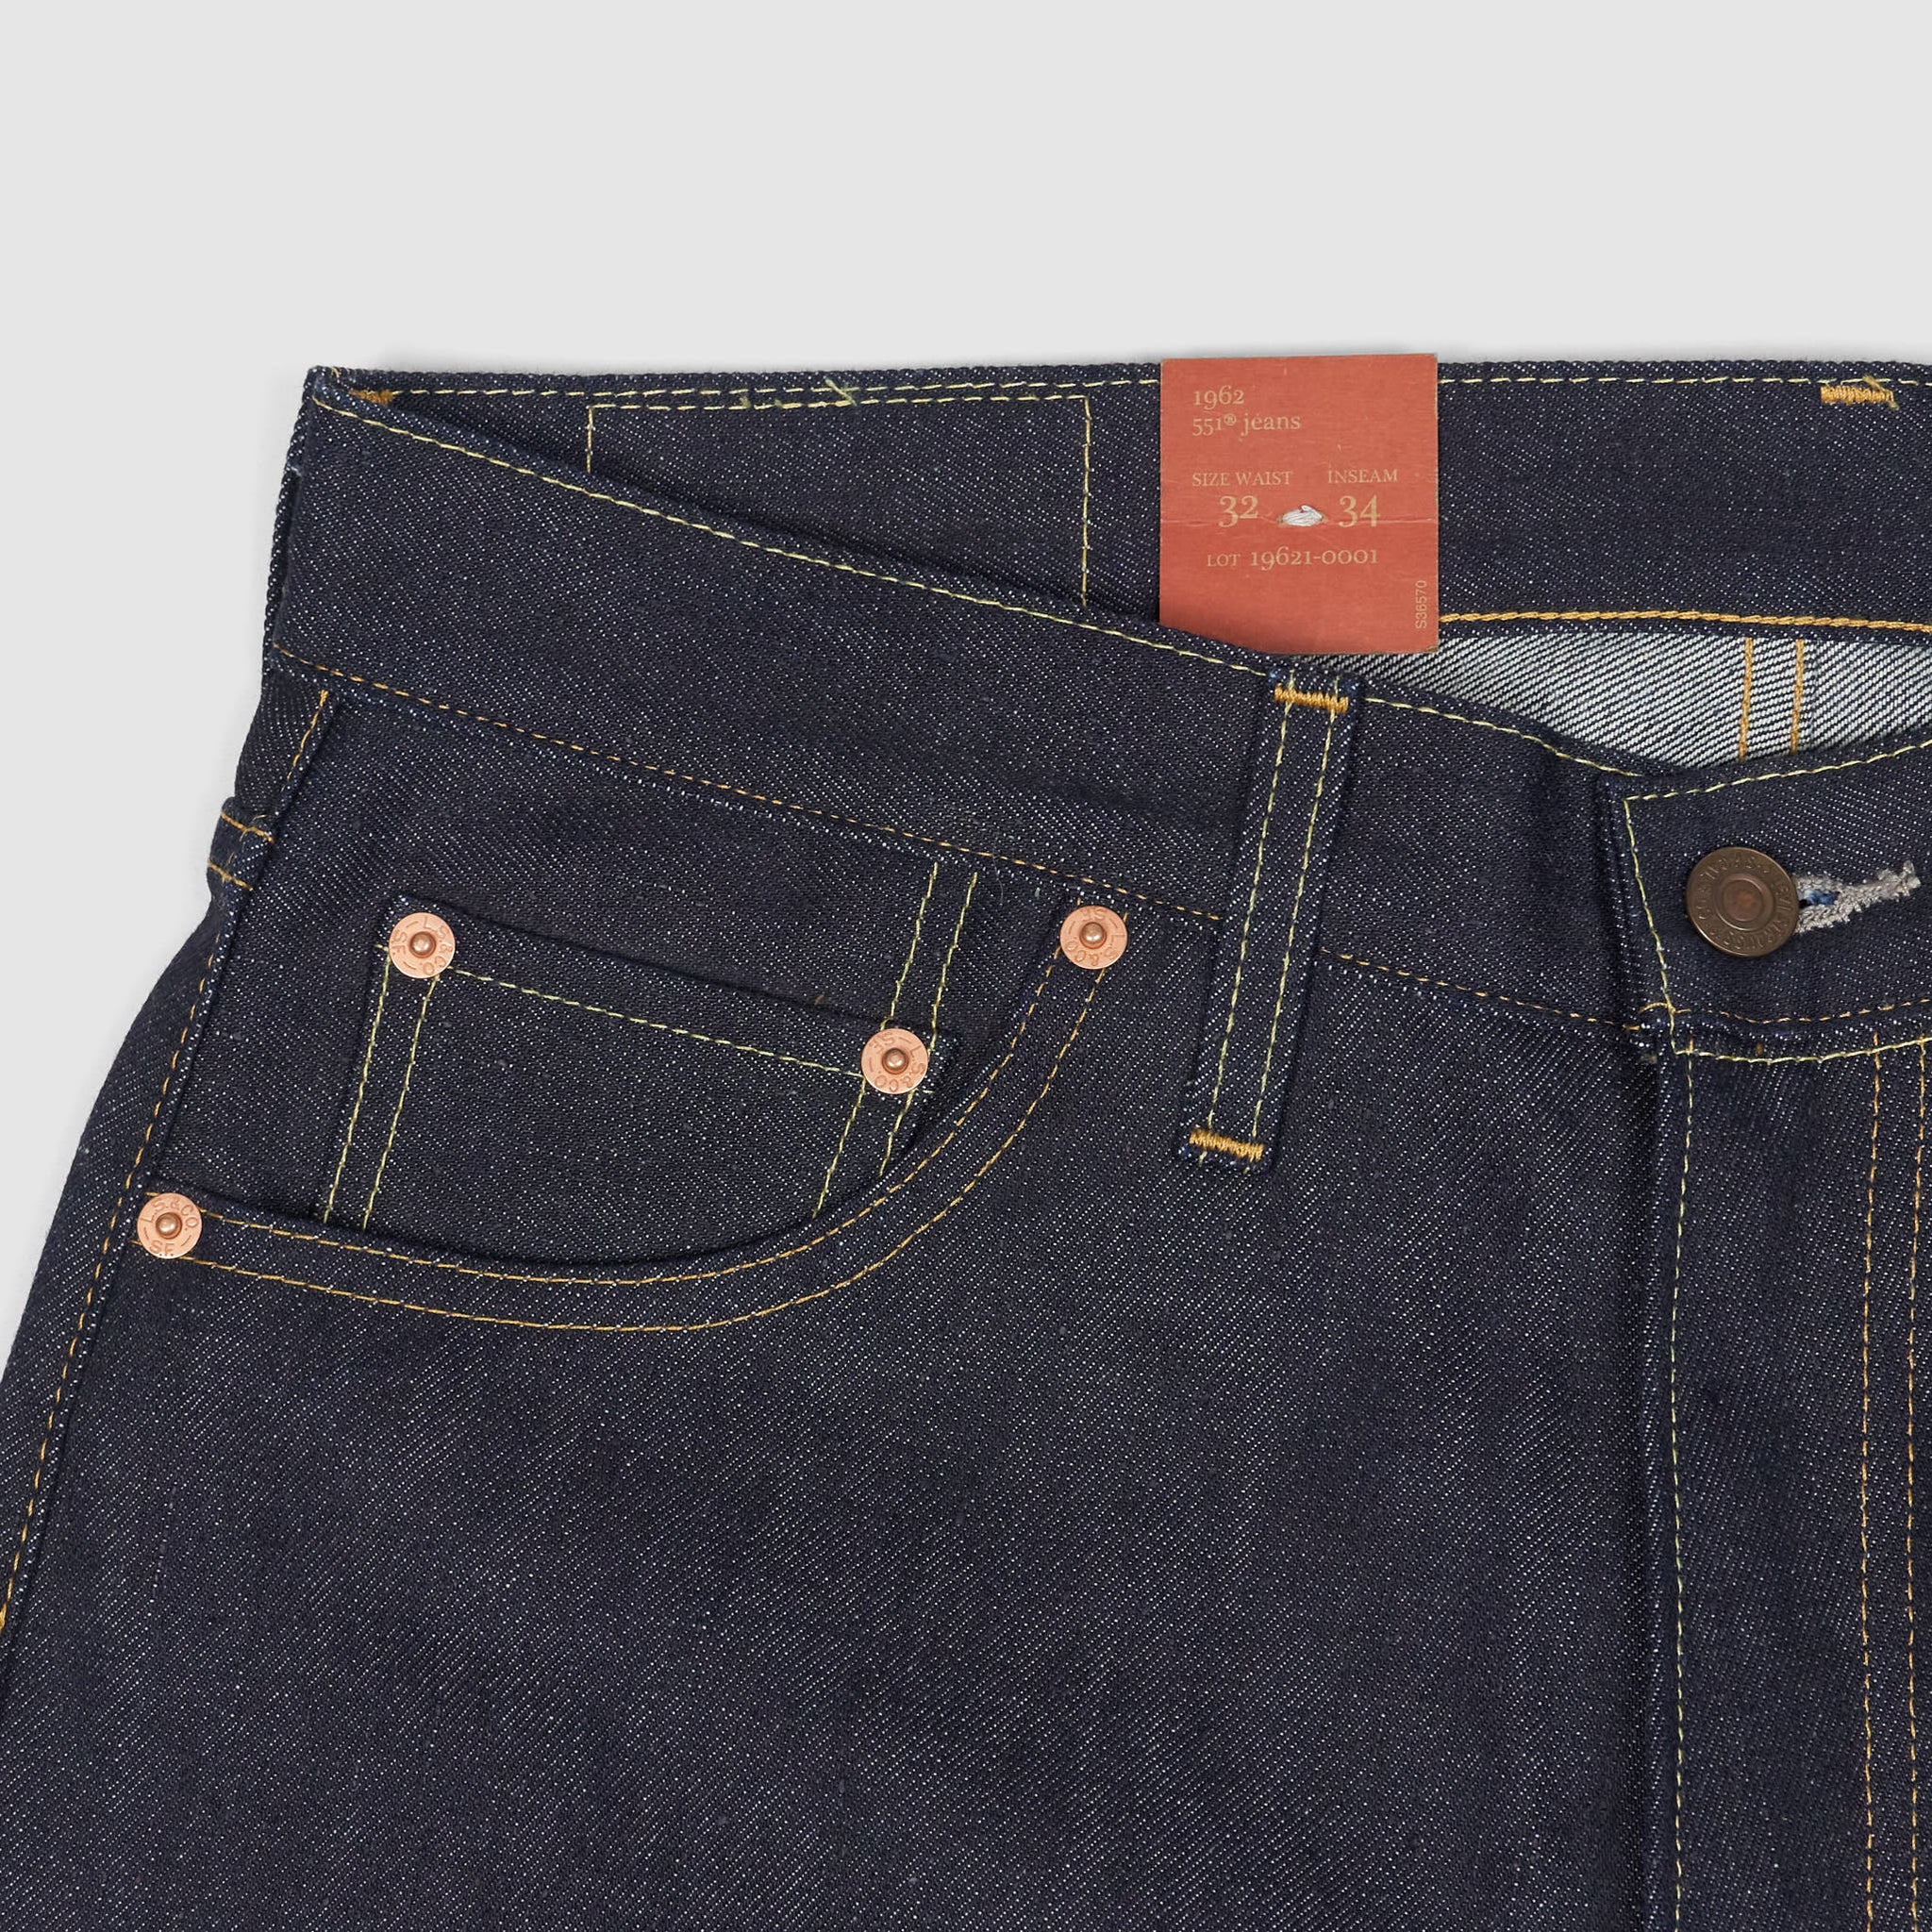 Levi's® Vintage Clothing 551™ZXX 1962 Cone Denim Jeans - DeeCee style